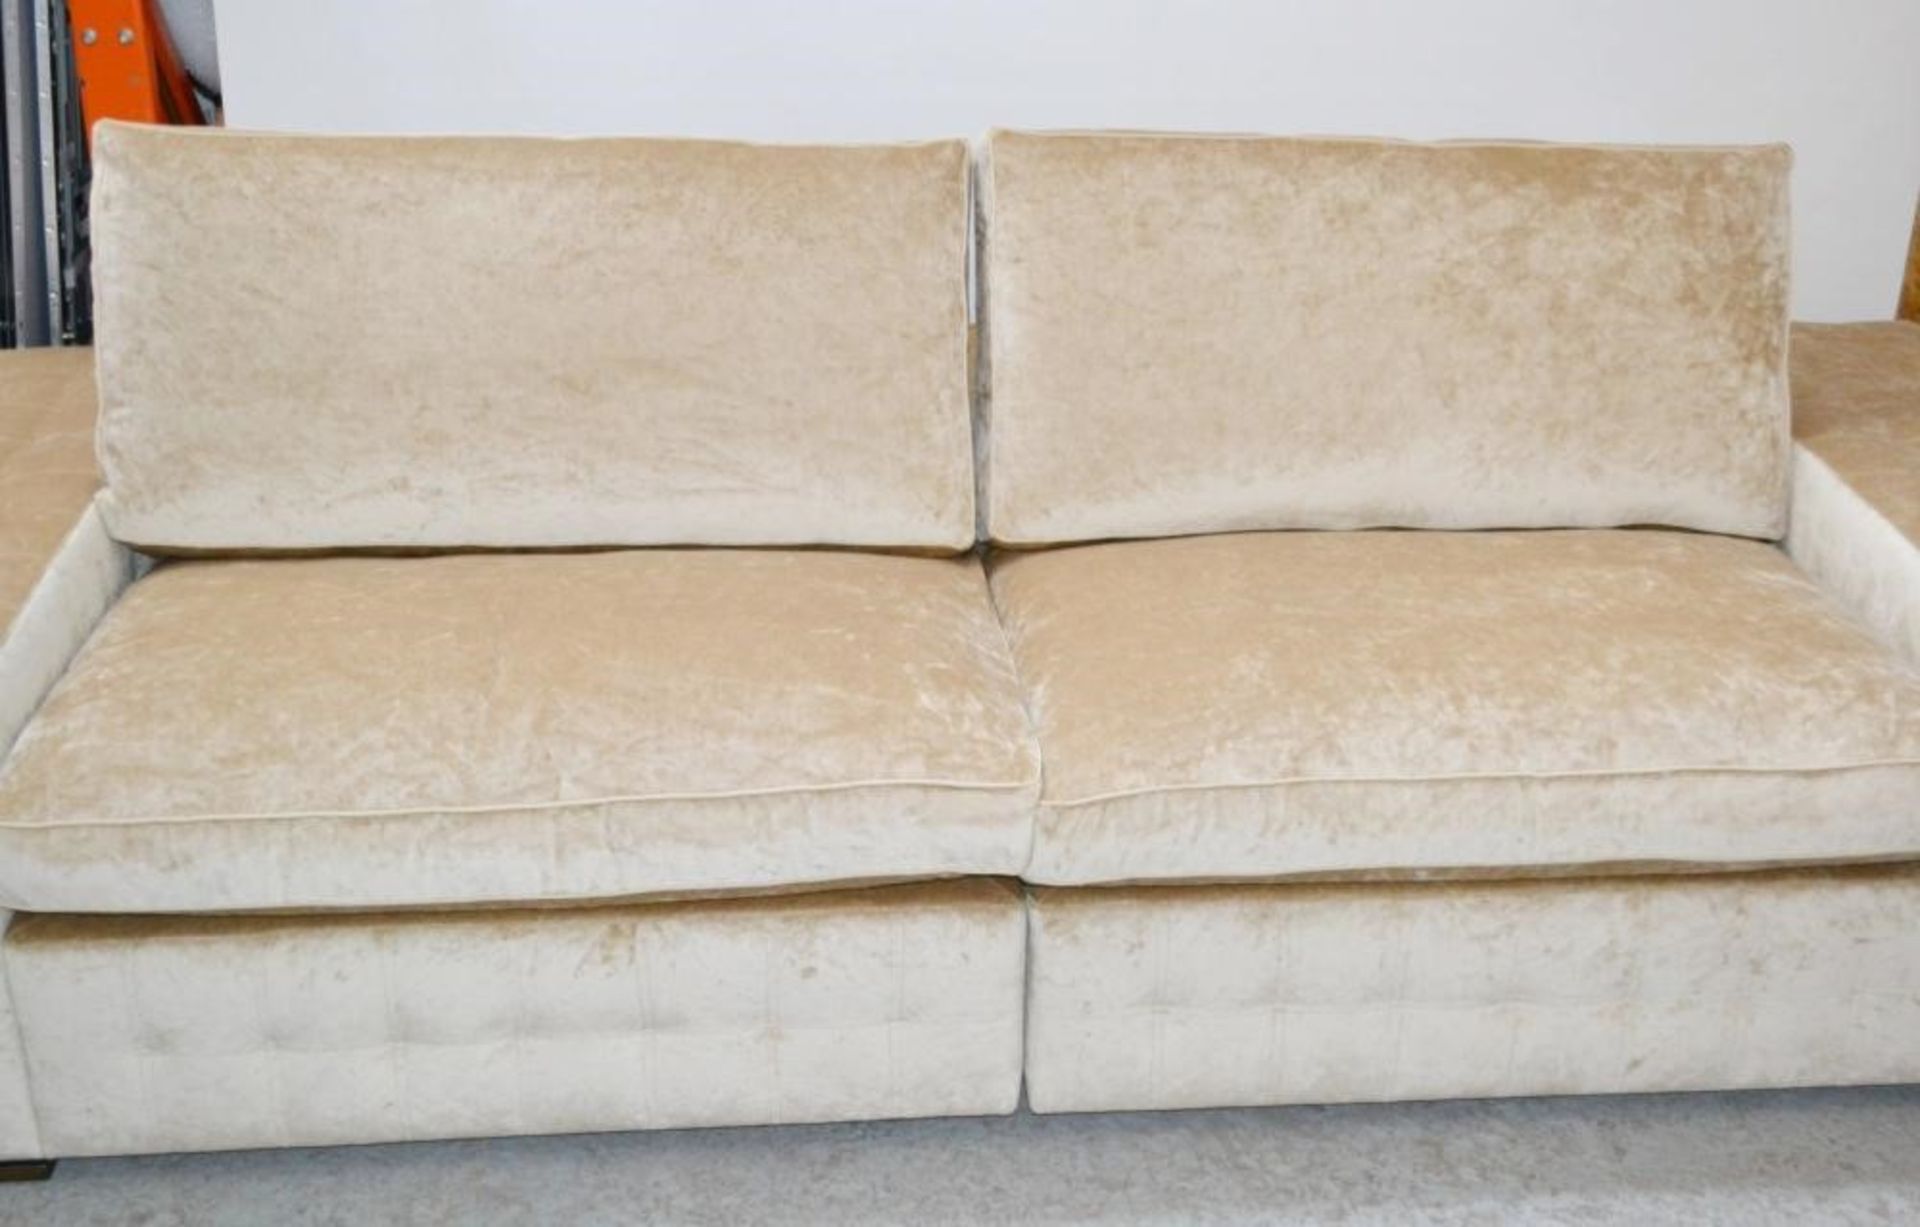 1 x GIORGIO "Sayonara" 3-Seater Sofa In An Opulent Champagne Chenille Upholstery - Ref: 4711347 NP1/ - Bild 5 aus 8